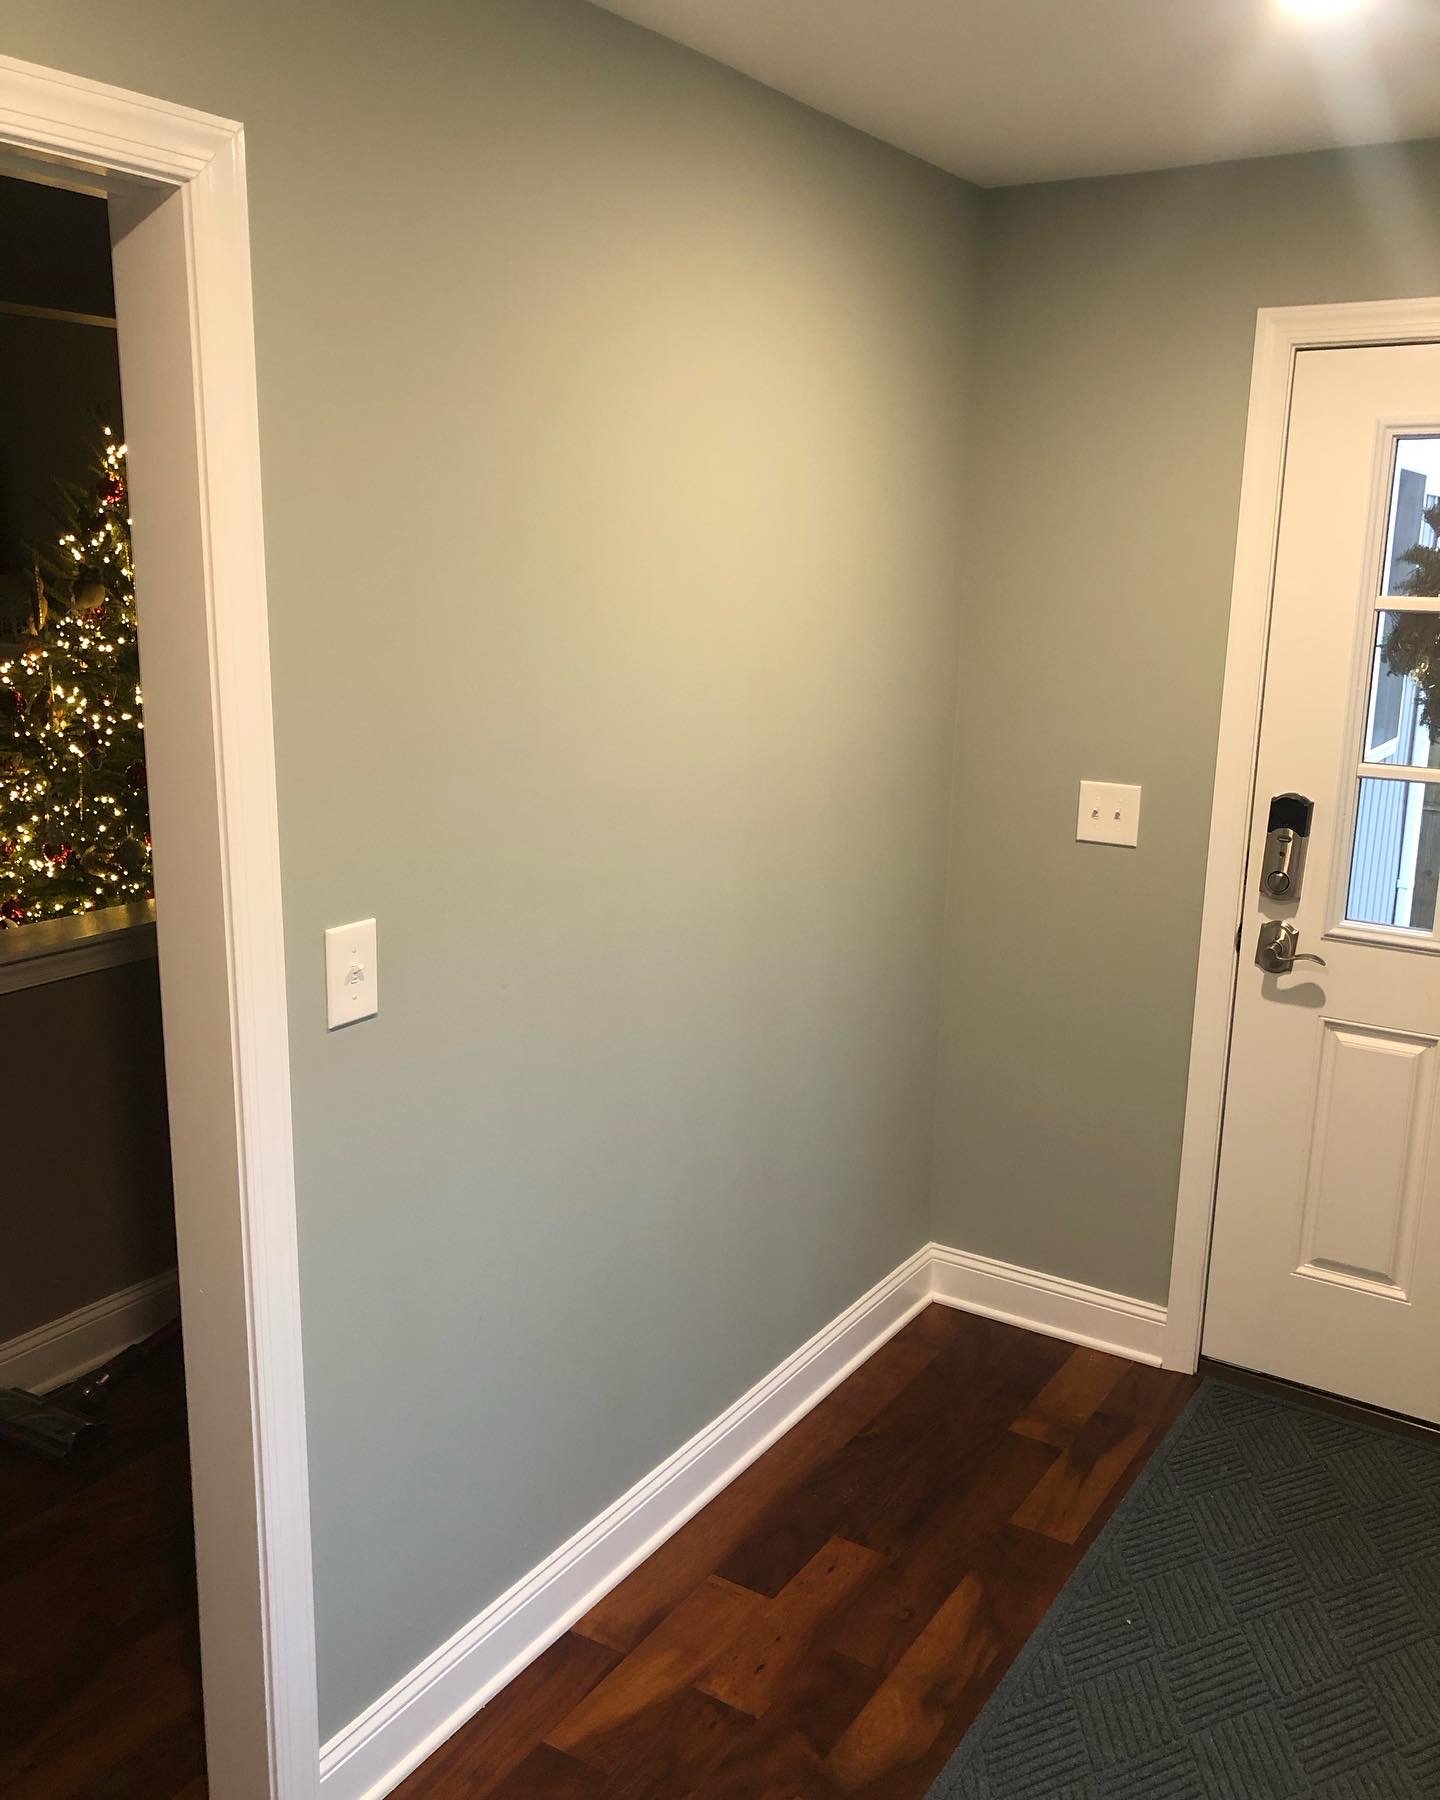  A client asked me to create a new set of built-ins in their mudroom. The space was a little restricted due to the existing doorways, but there was a small recessed alcove on the opposing wall that created more opportunities for hanging storage.  